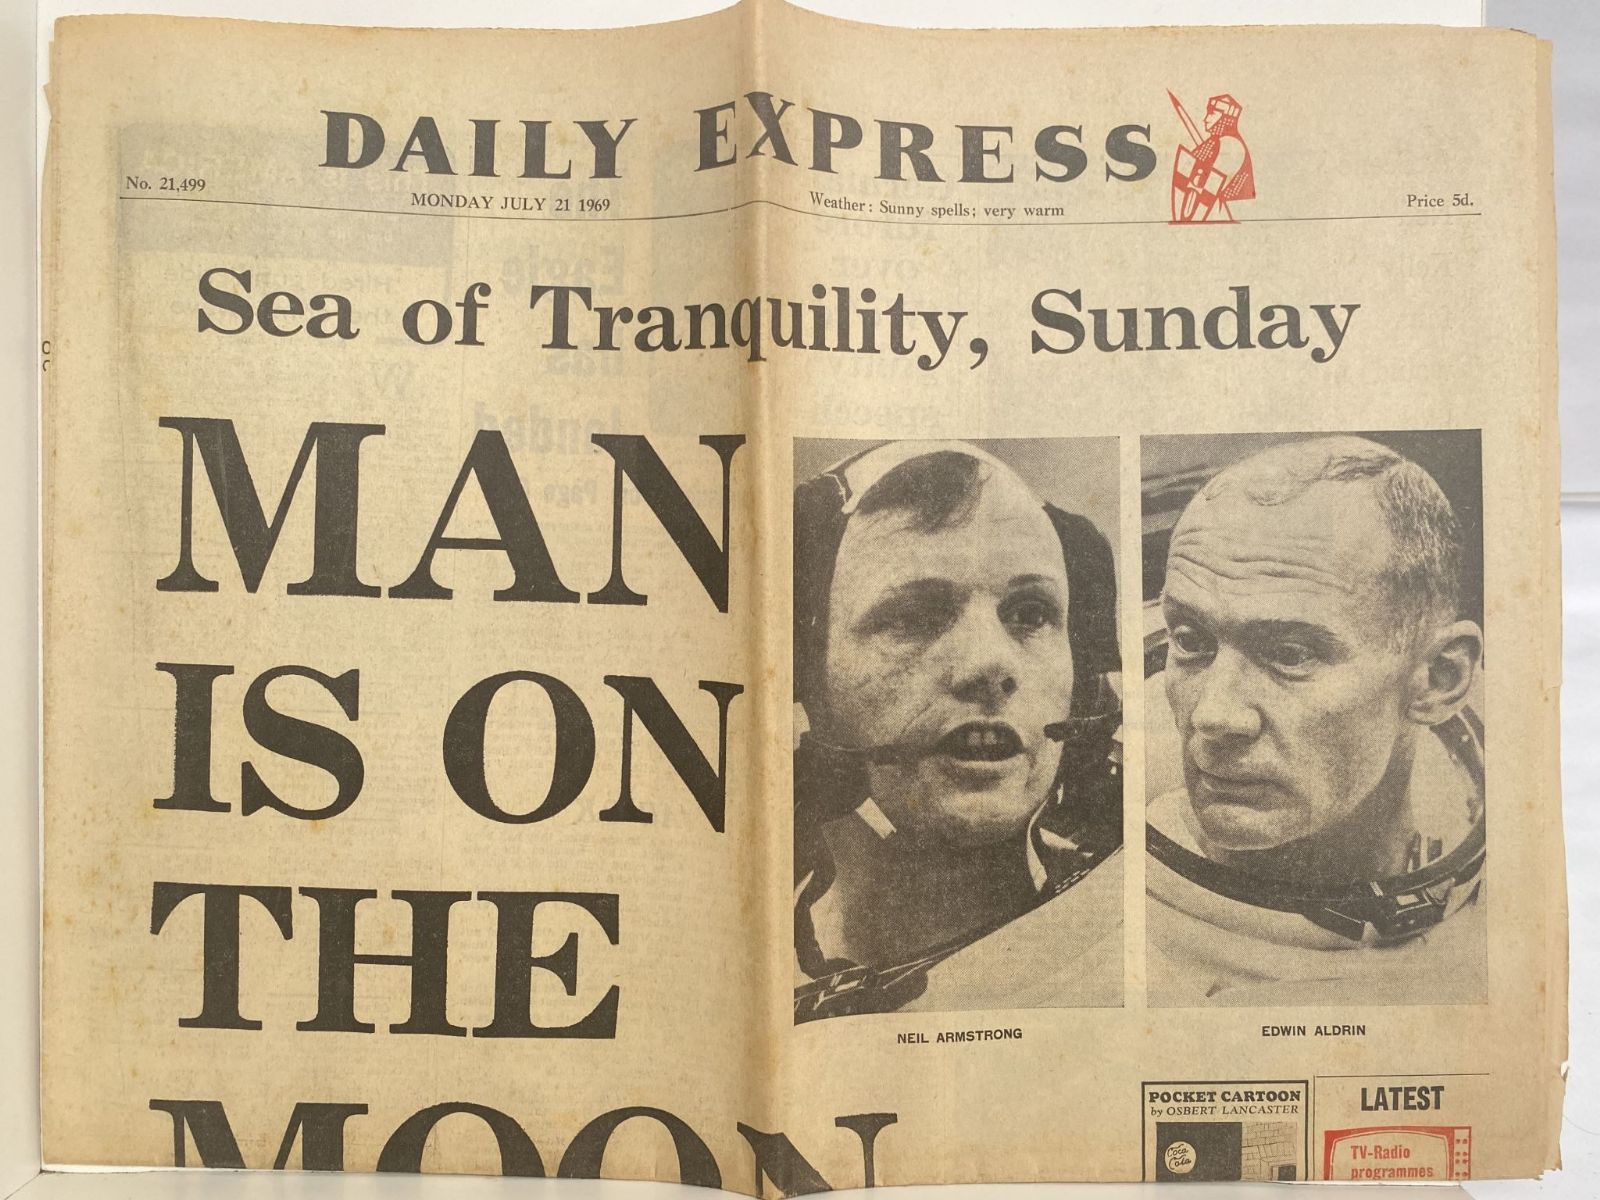 OLD NEWSPAPER: Daily Express, 21 July 1969 - Moon Landing Special